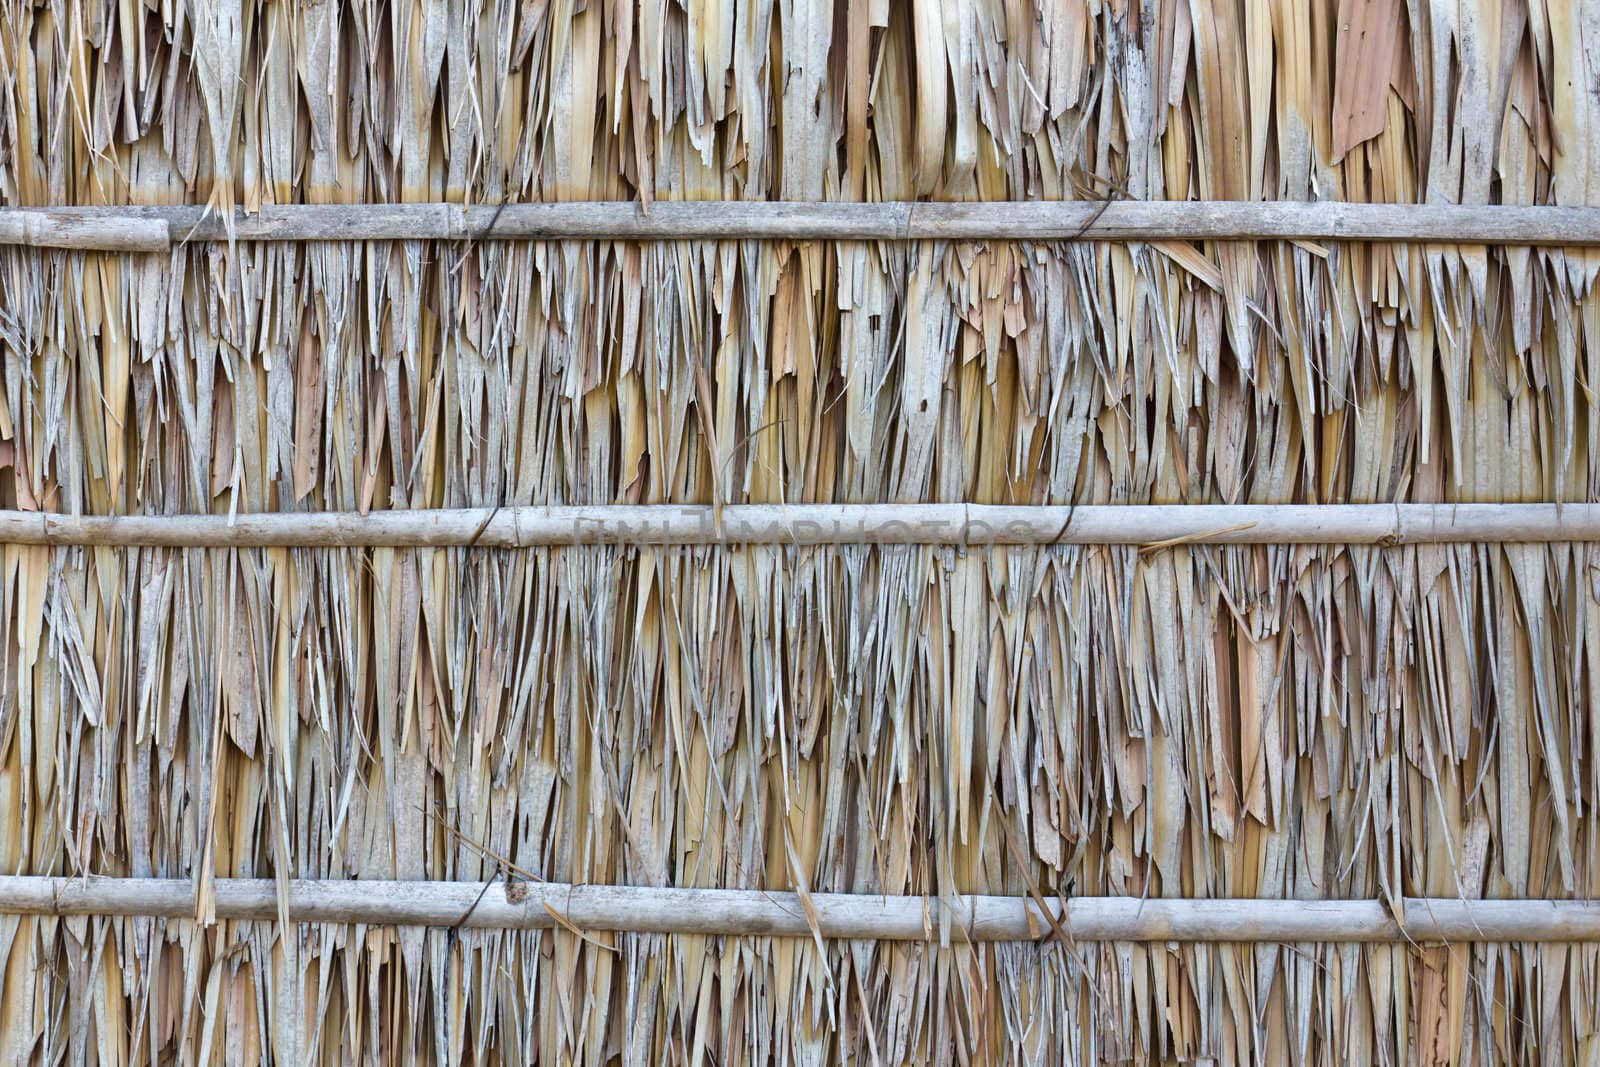 Palm leaf wall texture is natural wall